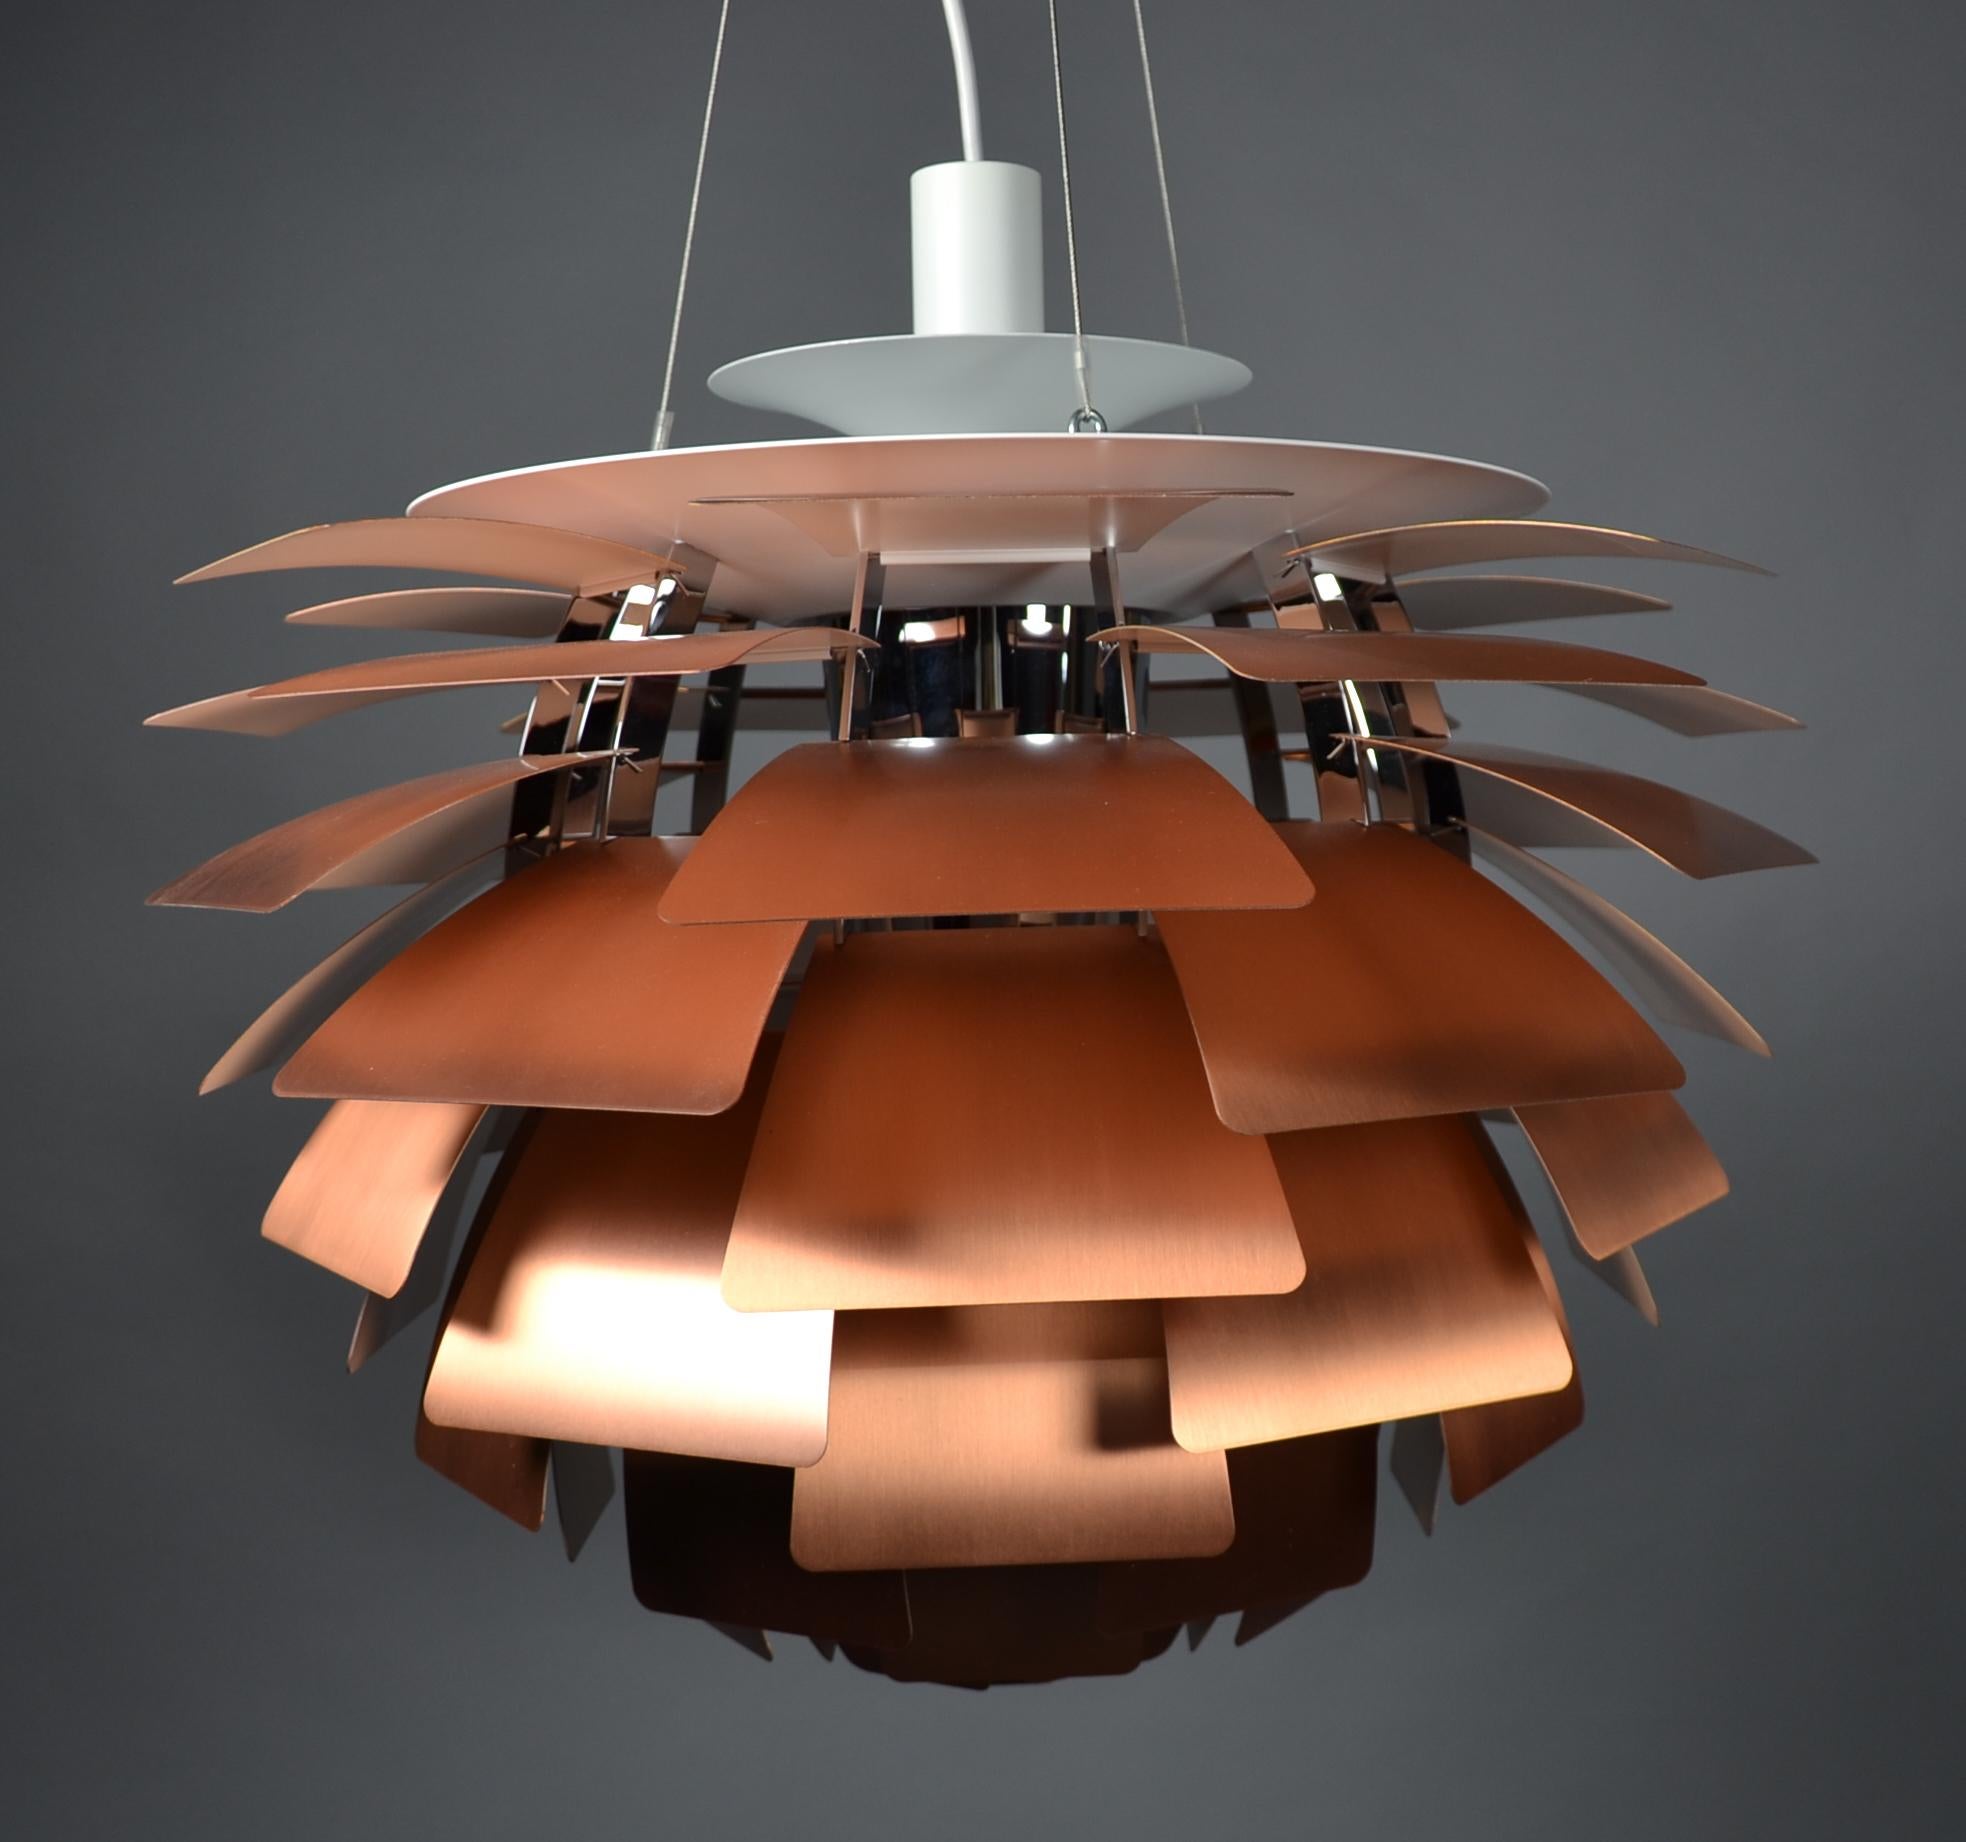 Design: Poul Henningsen
Design: from 1958
Manufacturer: Louis Poulsen
Condition: used
Model: PH Arichoke
Leaves inside white painted metal, outside copper.
E40 socket for max 500 watt bulb.
A baldachin and a 300 watt bulb are included.
The